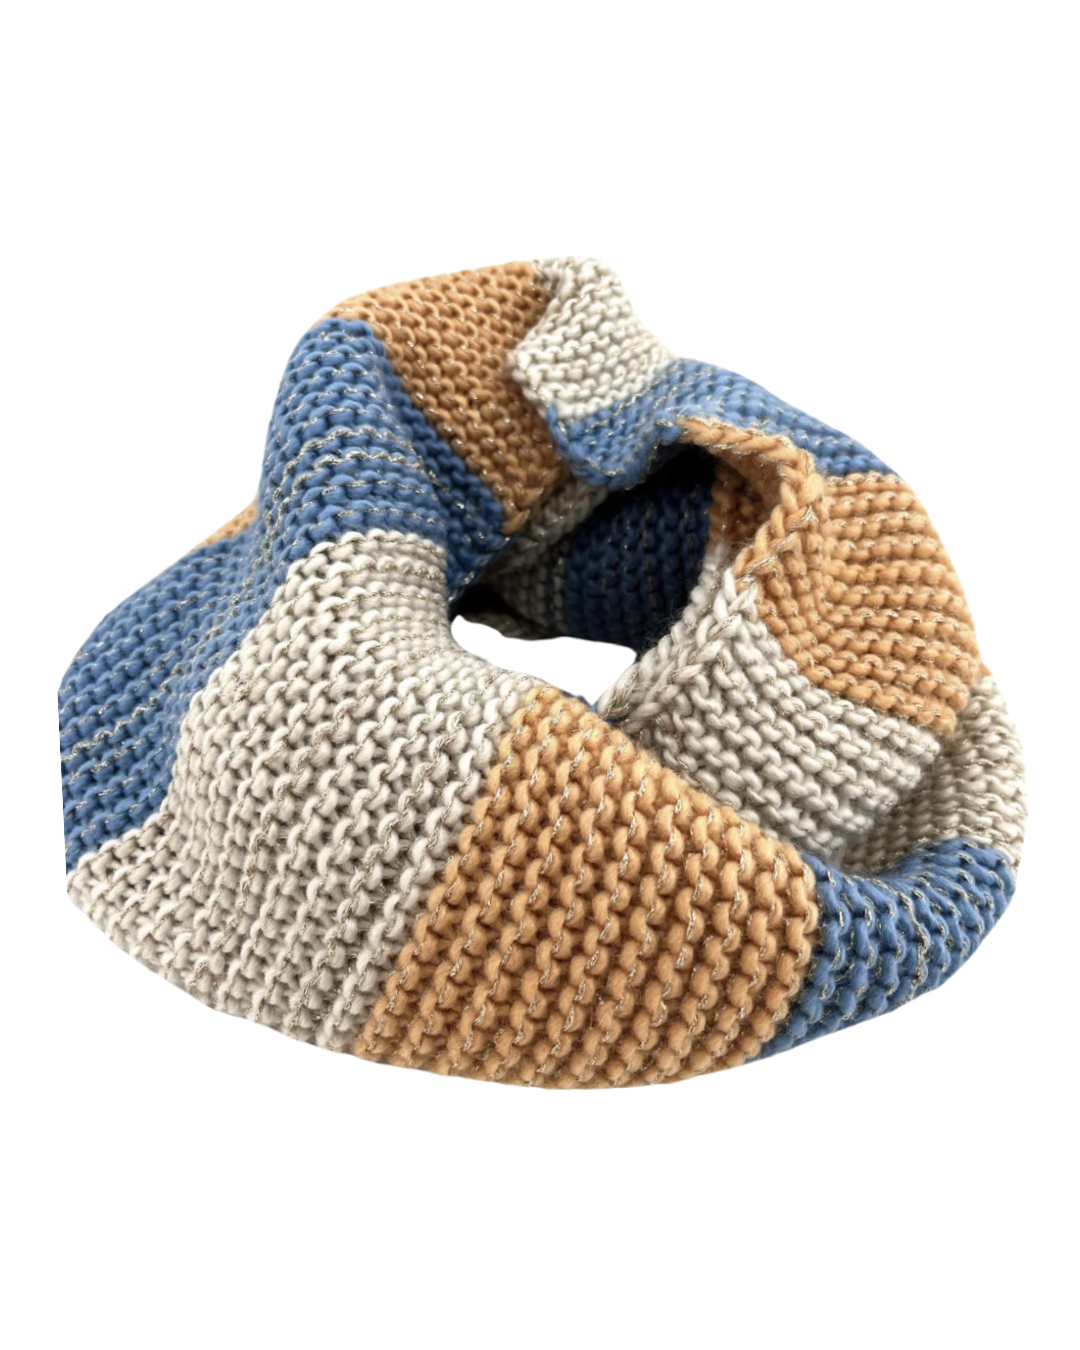 Striped Knit Snood Scarf in Teal and Orange